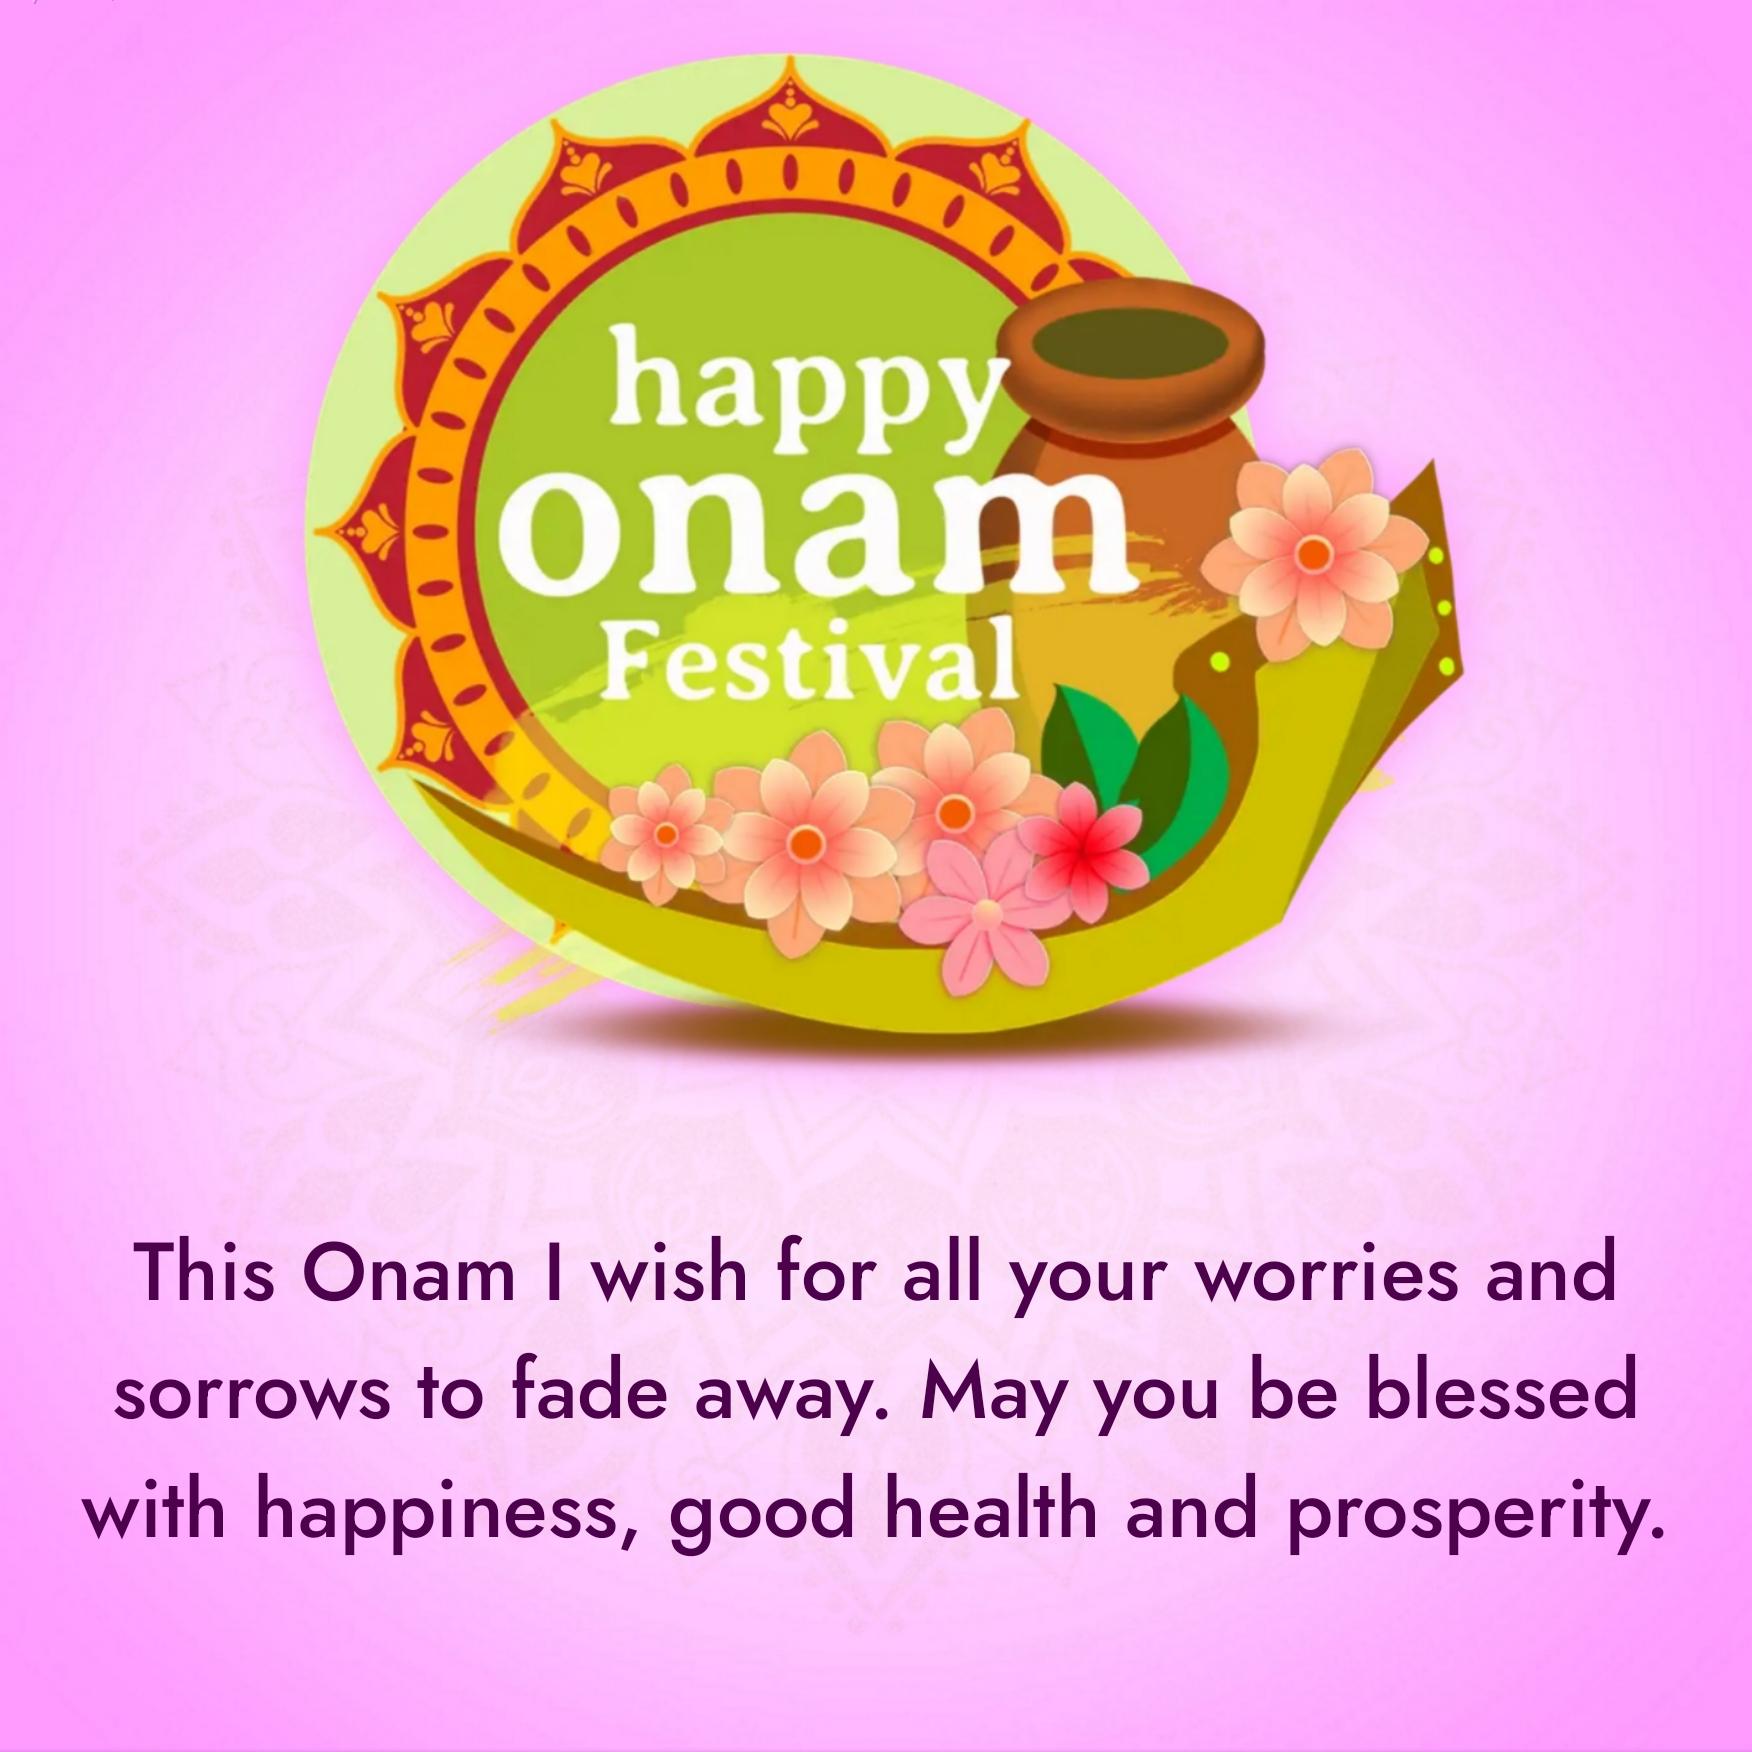 This Onam I wish for all your worries and sorrows to fade away